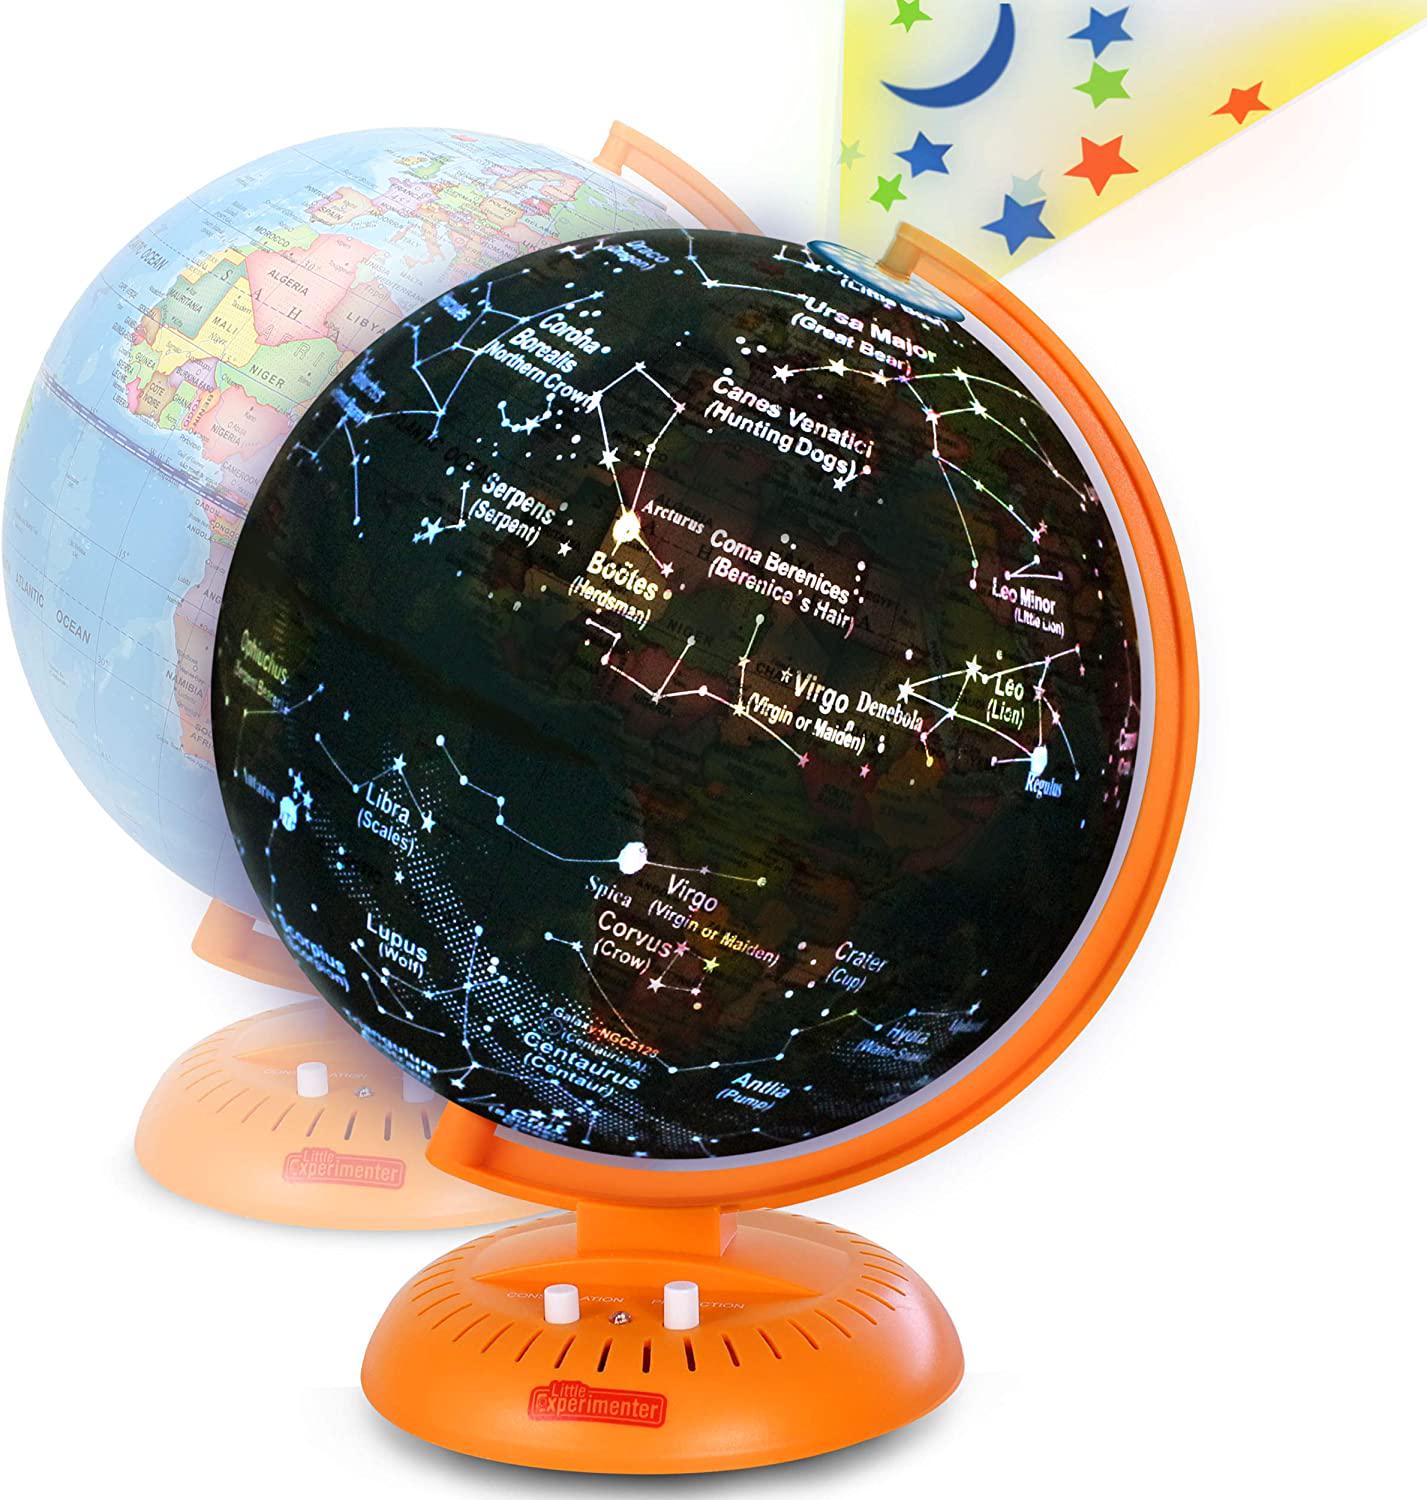 Little Experimenter, Little Experimenter Globe for Kids: 3-in-1 World Globe with Illuminated Star Map and Built-in Projector, 8